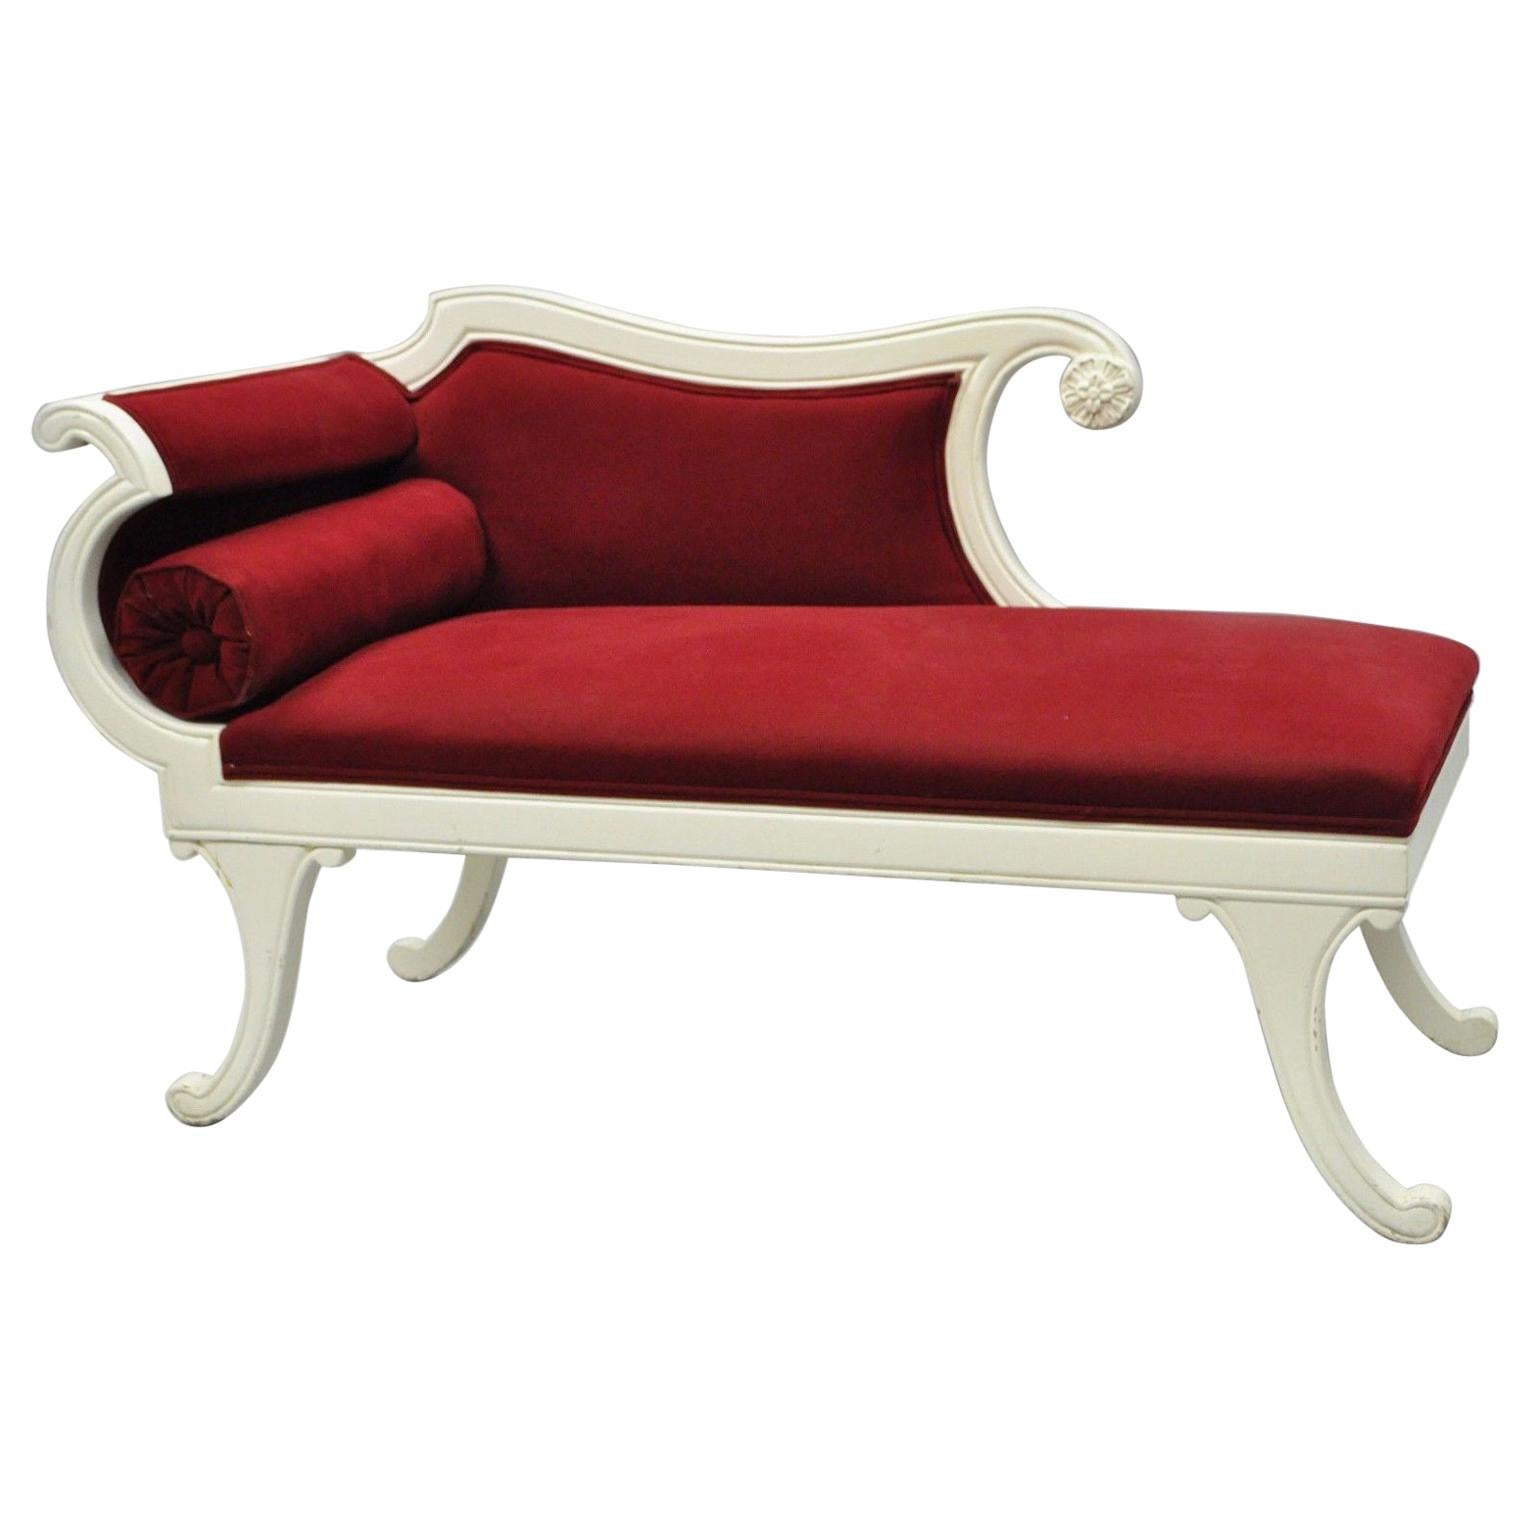 Small French Empire Style Carved Wood Red White Chaise Lounge Fainting Couch